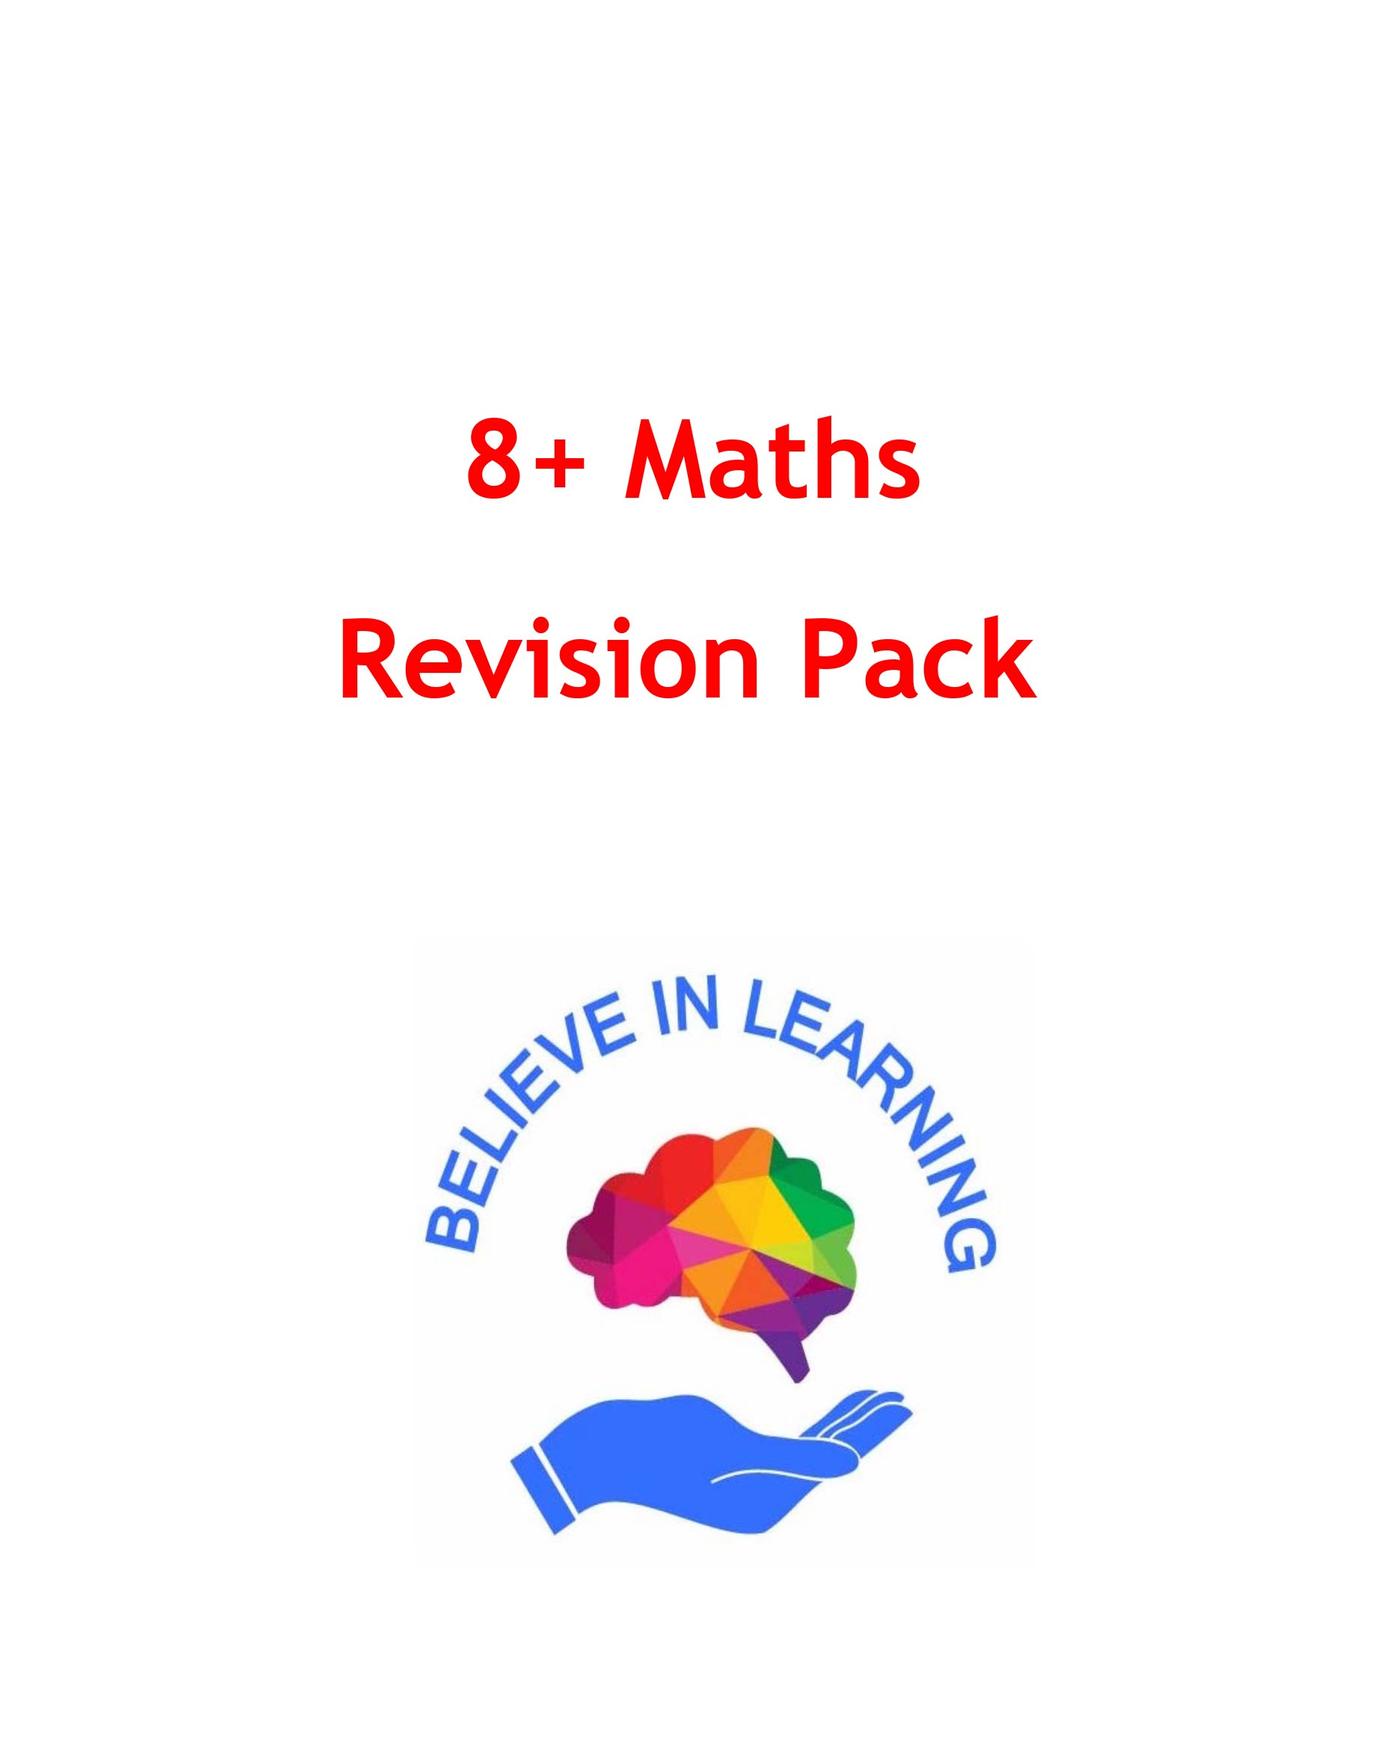 8+ Maths Revision Pack